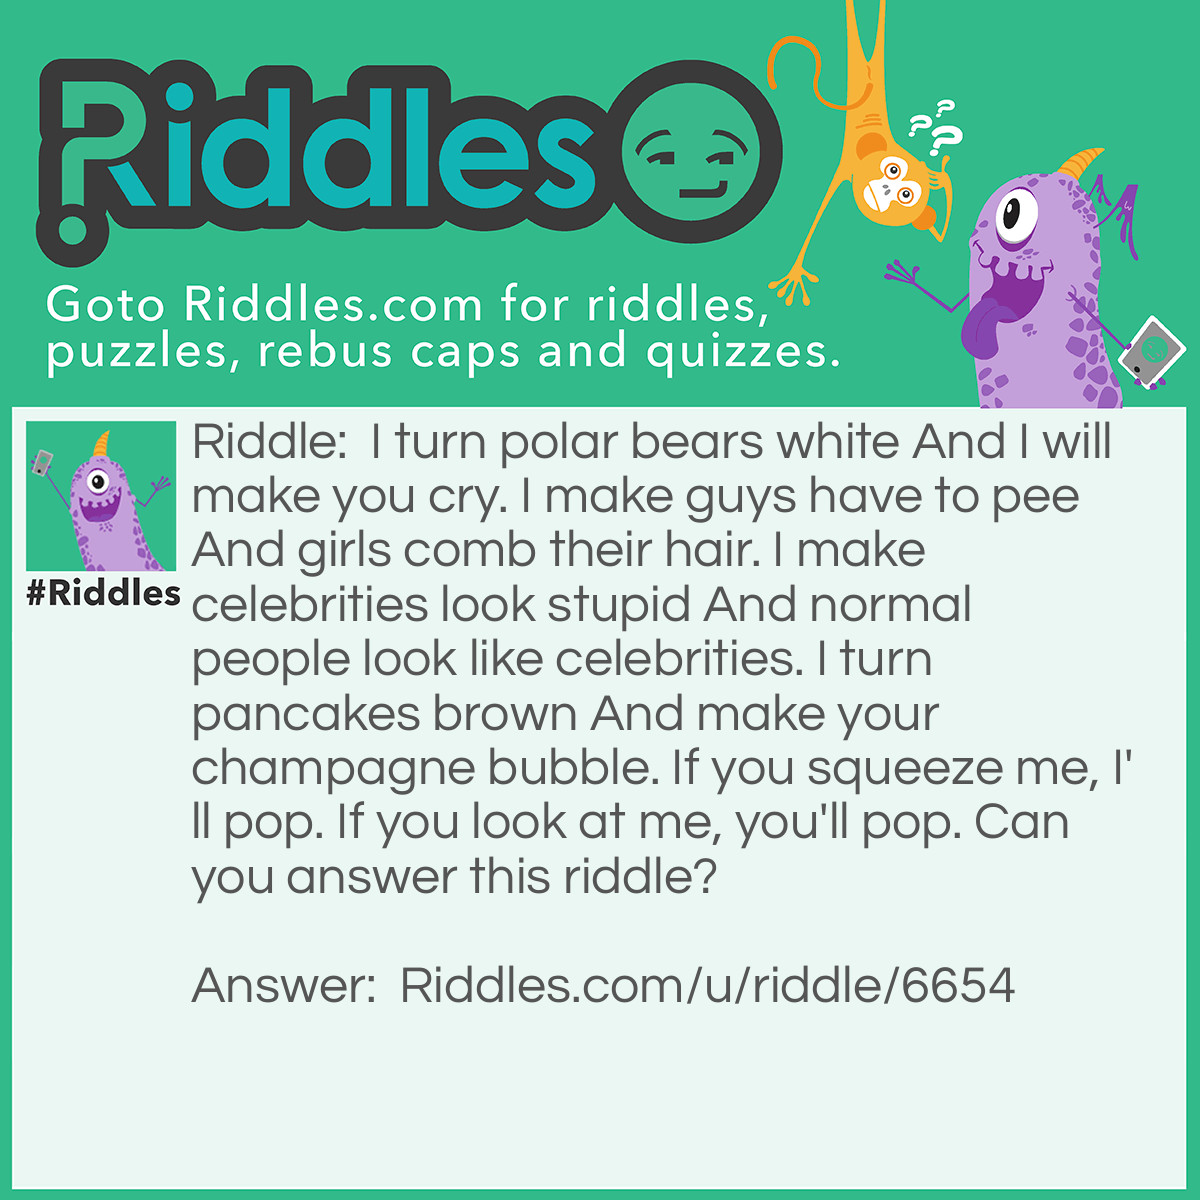 Riddle: I turn polar bears white And I will make you cry. I make guys have to pee And girls comb their hair. I make celebrities look stupid And normal people look like celebrities. I turn pancakes brown And make your champagne bubble. If you squeeze me, I'll pop. If you look at me, you'll pop. Can you answer this riddle? Answer: Pressure.